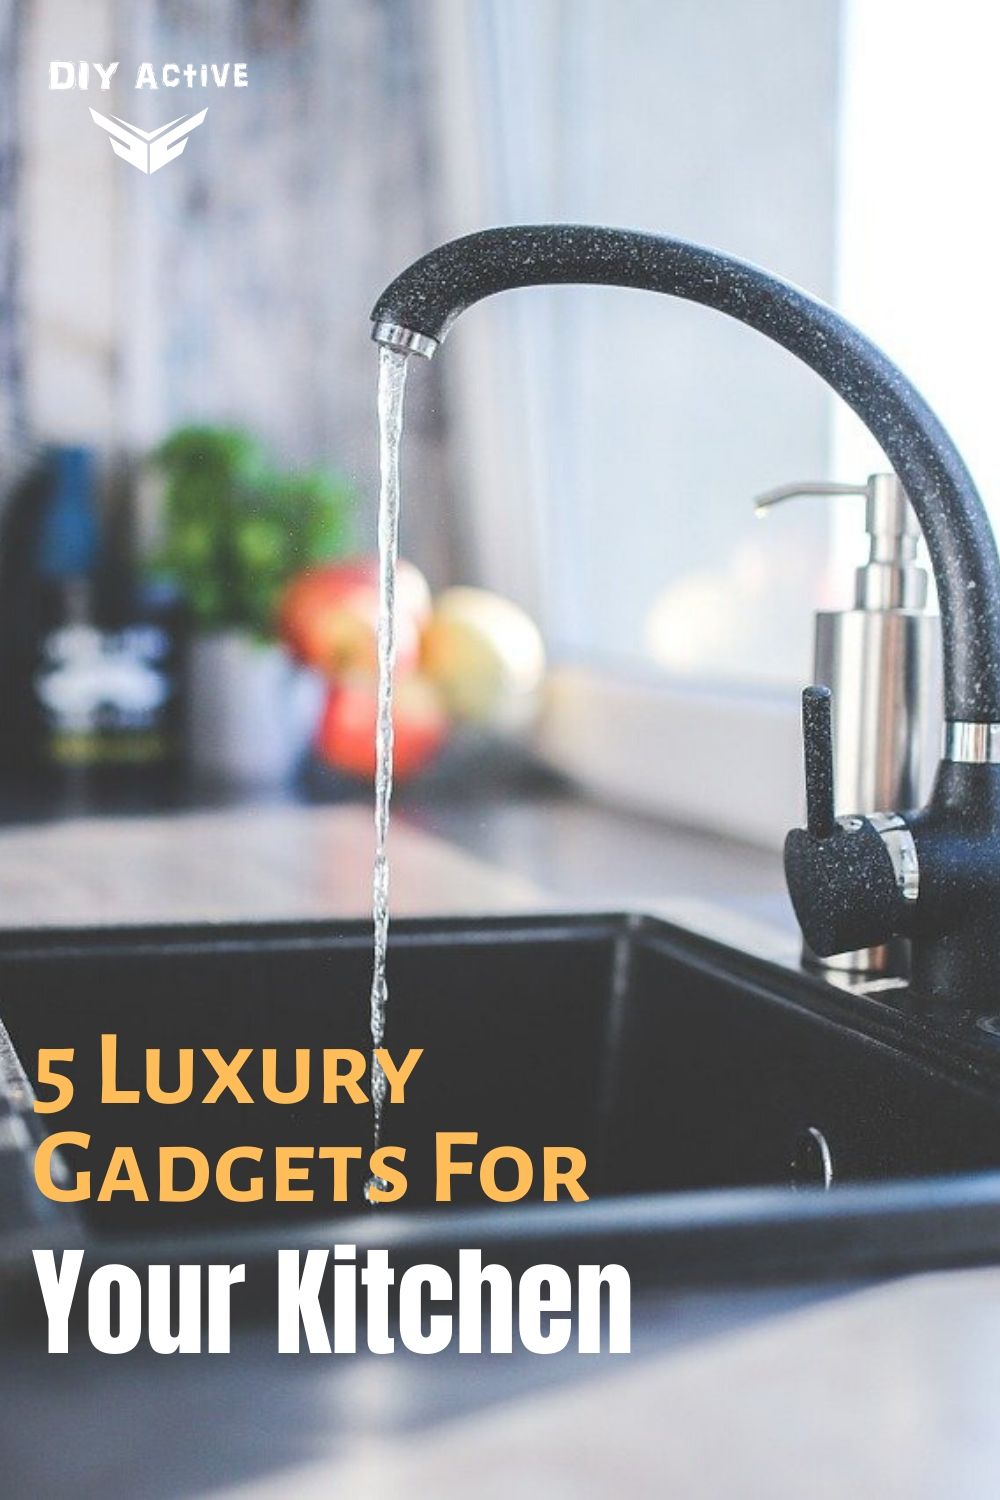 Top 5 Luxury Gadgets For Your Kitchen